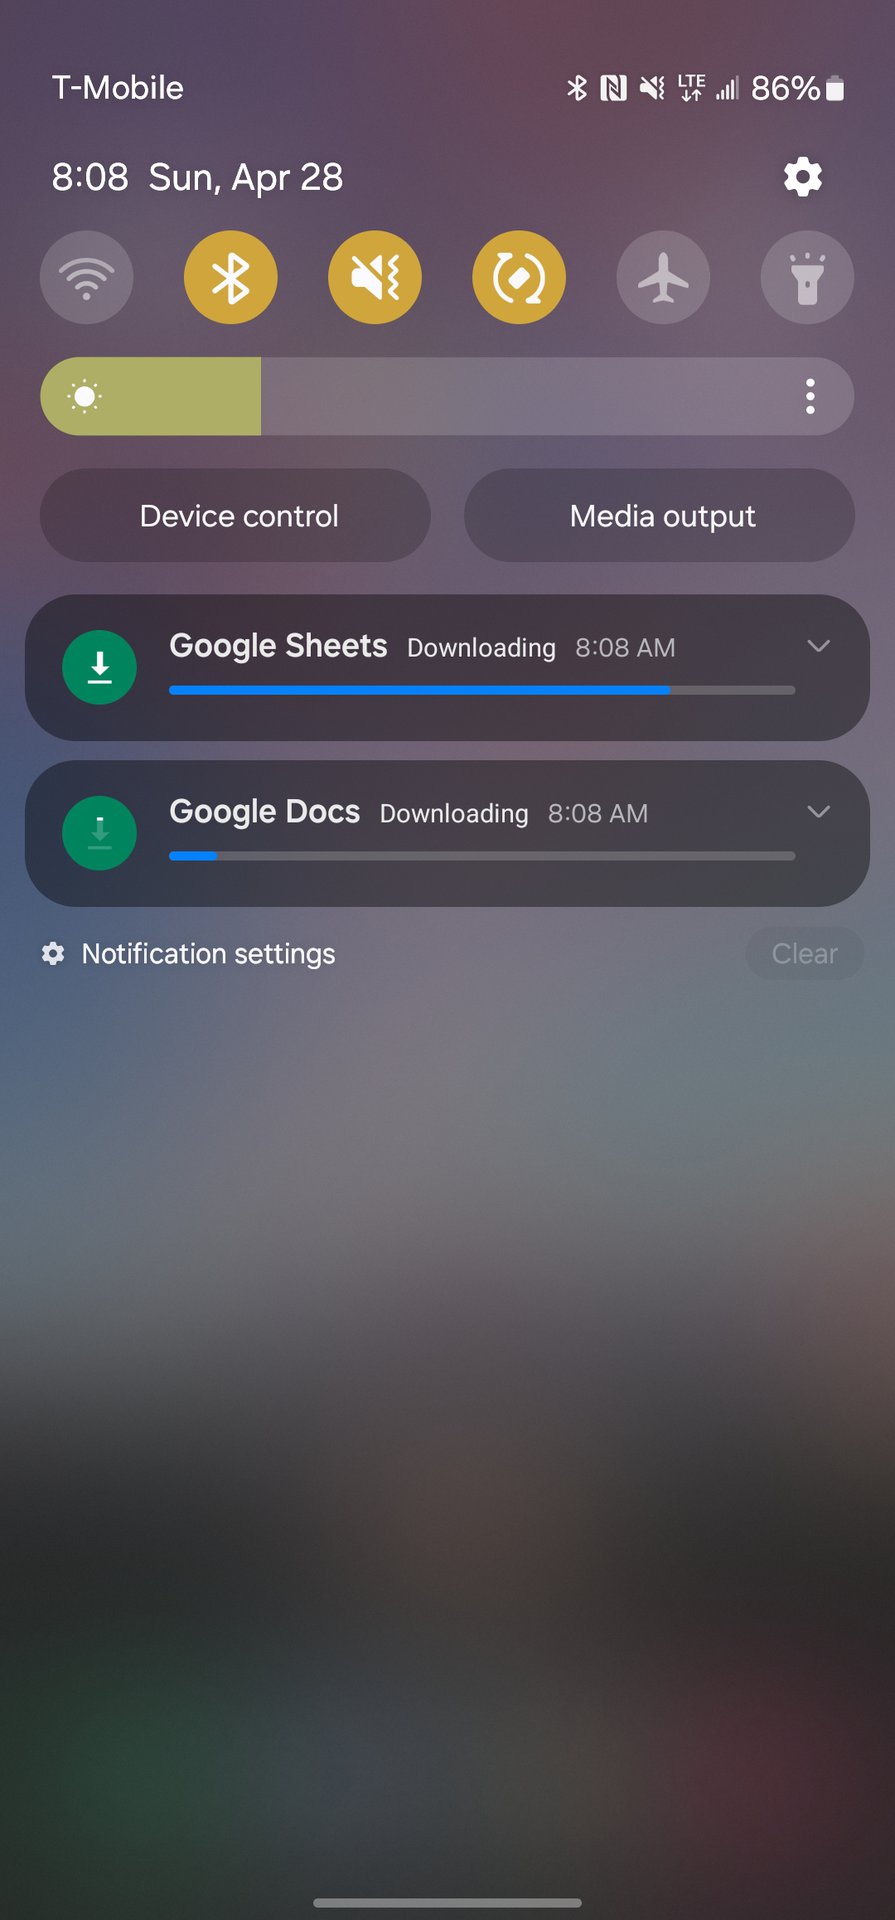 Two apps are downloaded at the same time